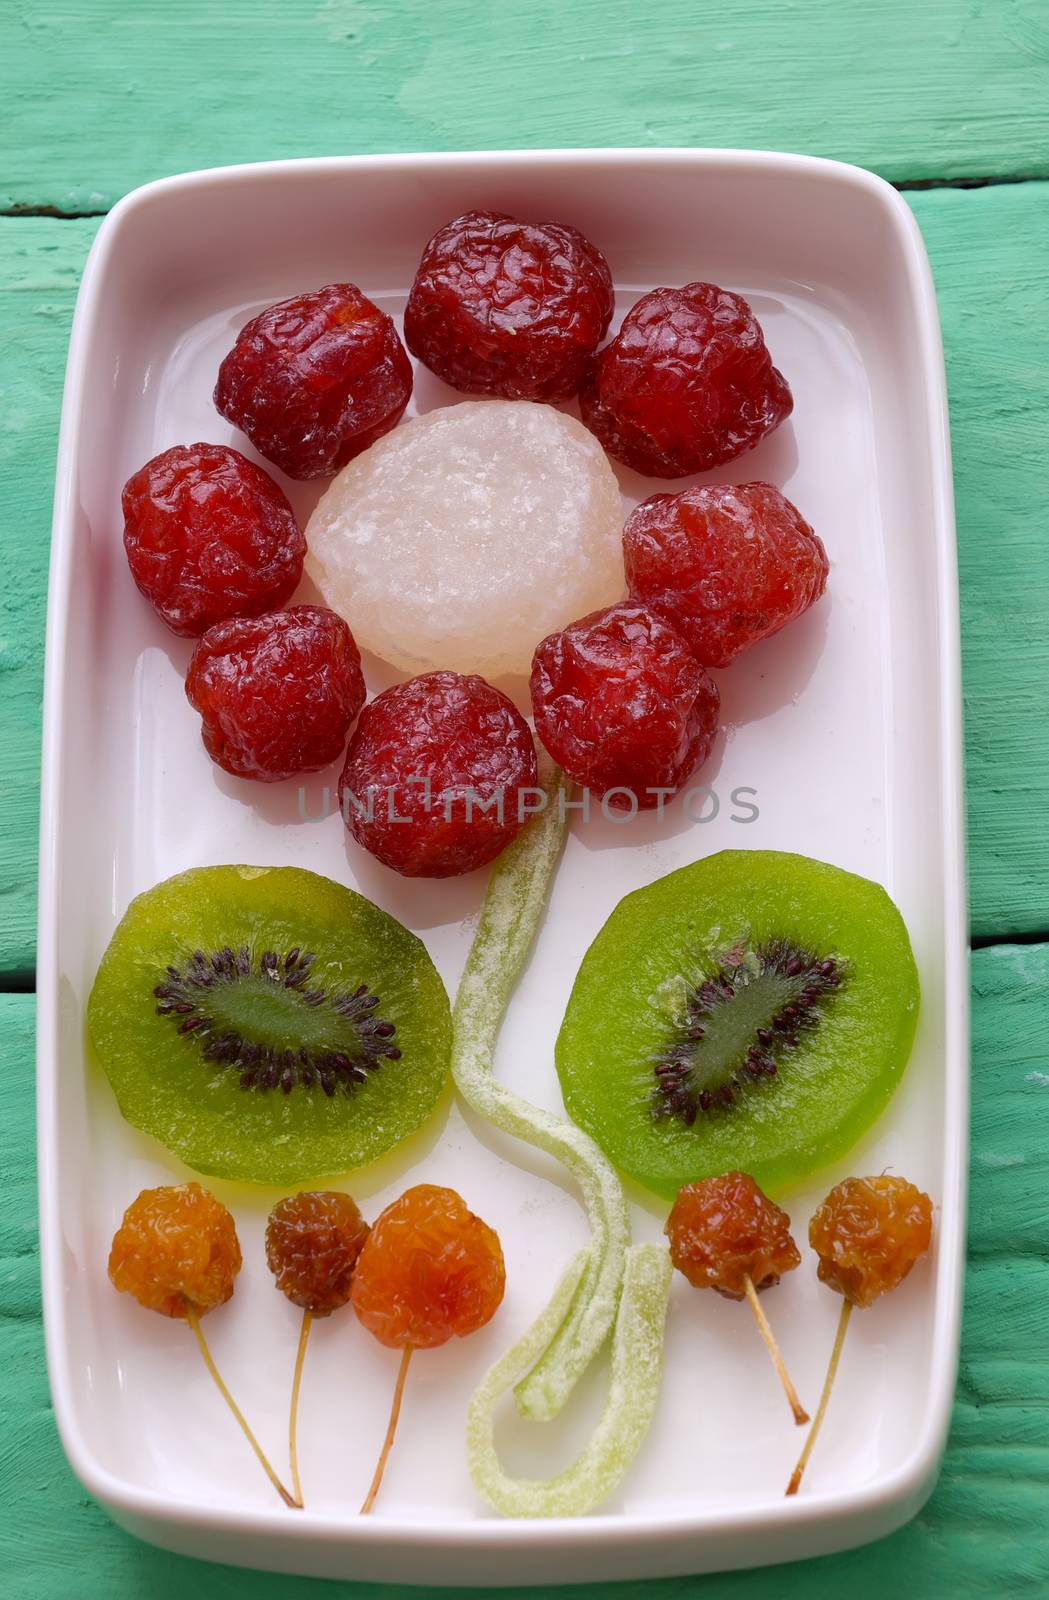 Vietnamese food for Vietnam Tet holiday, also lunar new year of Asia, colorful preserved fruit as kiwi, damson jam, or coconut jam set up on white plate with green wood background make art